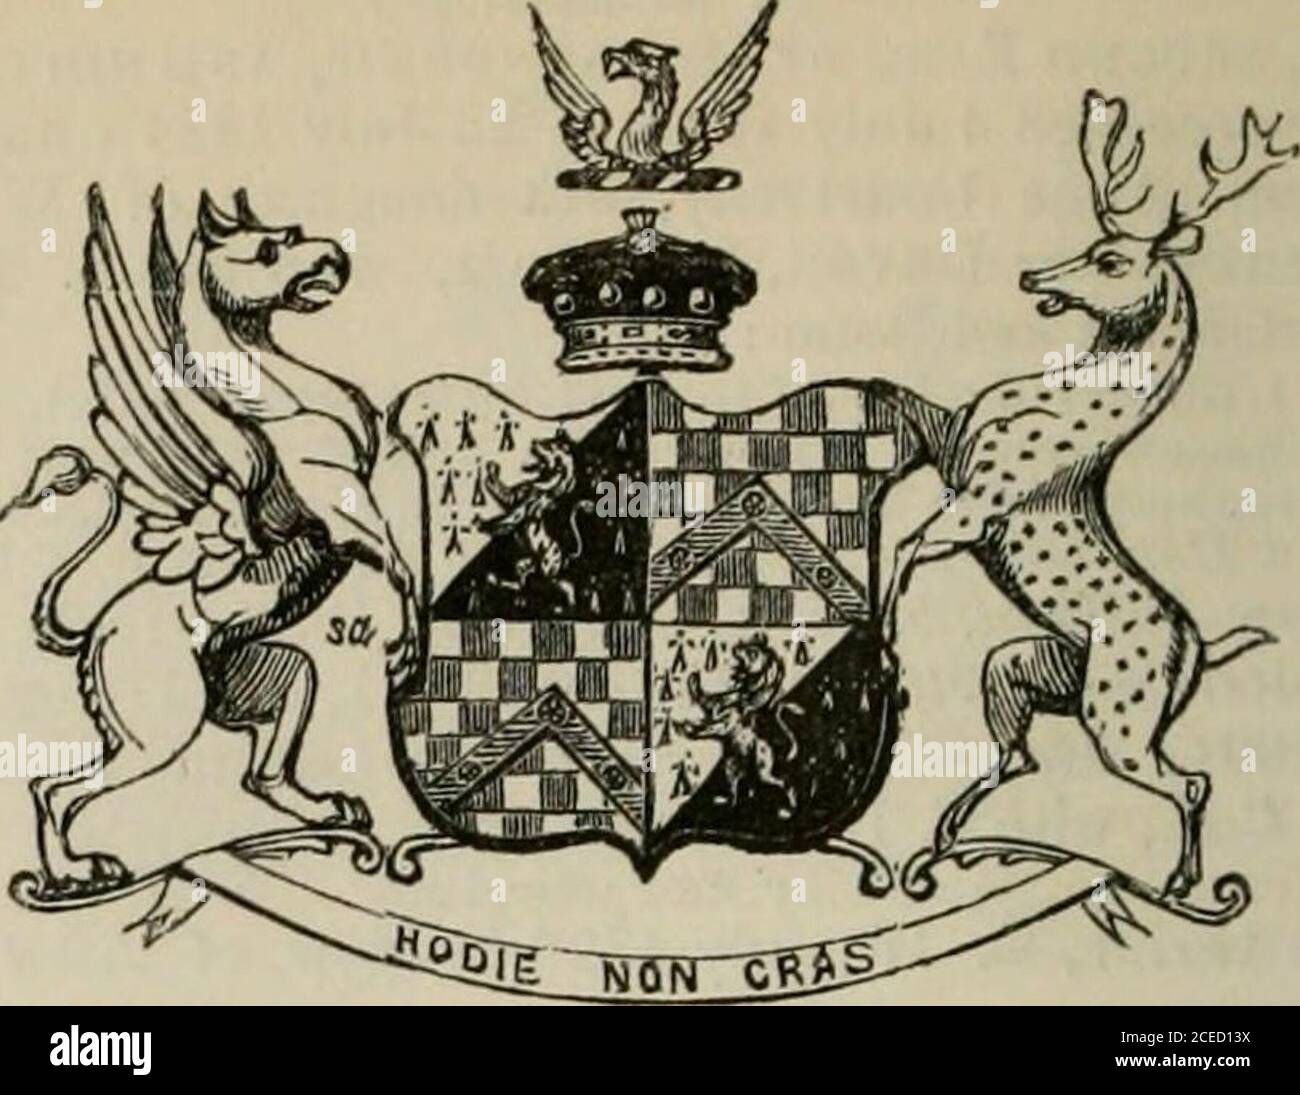 . The peerage of the British Empire as at present existing : arranged and printed from the personal communications of the nobility. Rector of Holton, Oxon, and has issue, 1 Mnry-Earle, b. 21 Sept. 1839. 2 Henry-Arthur, 6. 22 JiUy 1841. 3 Catherine-Vere, t. 21 March1843. 4 Ellen-Arabella, b. 26 July 1845. 3 Rev. William, M..., m. 18 June1835, Laura-Anne, daughter of the lateMajor-Gen. Oliver-lliomas Jones, ofFonmon Castle, Co. Glamorgan, andhas issue, 1 Catharine-Wilhelmina, 6. 1Nov. 1837. 2 Charles-Henry, /y.23 July 1840. 3 Oliver-Fraucis-Theodore, b. 2Jan. 1842. 4 LauraEleanor-Vere,6. 30 Oct Stock Photo